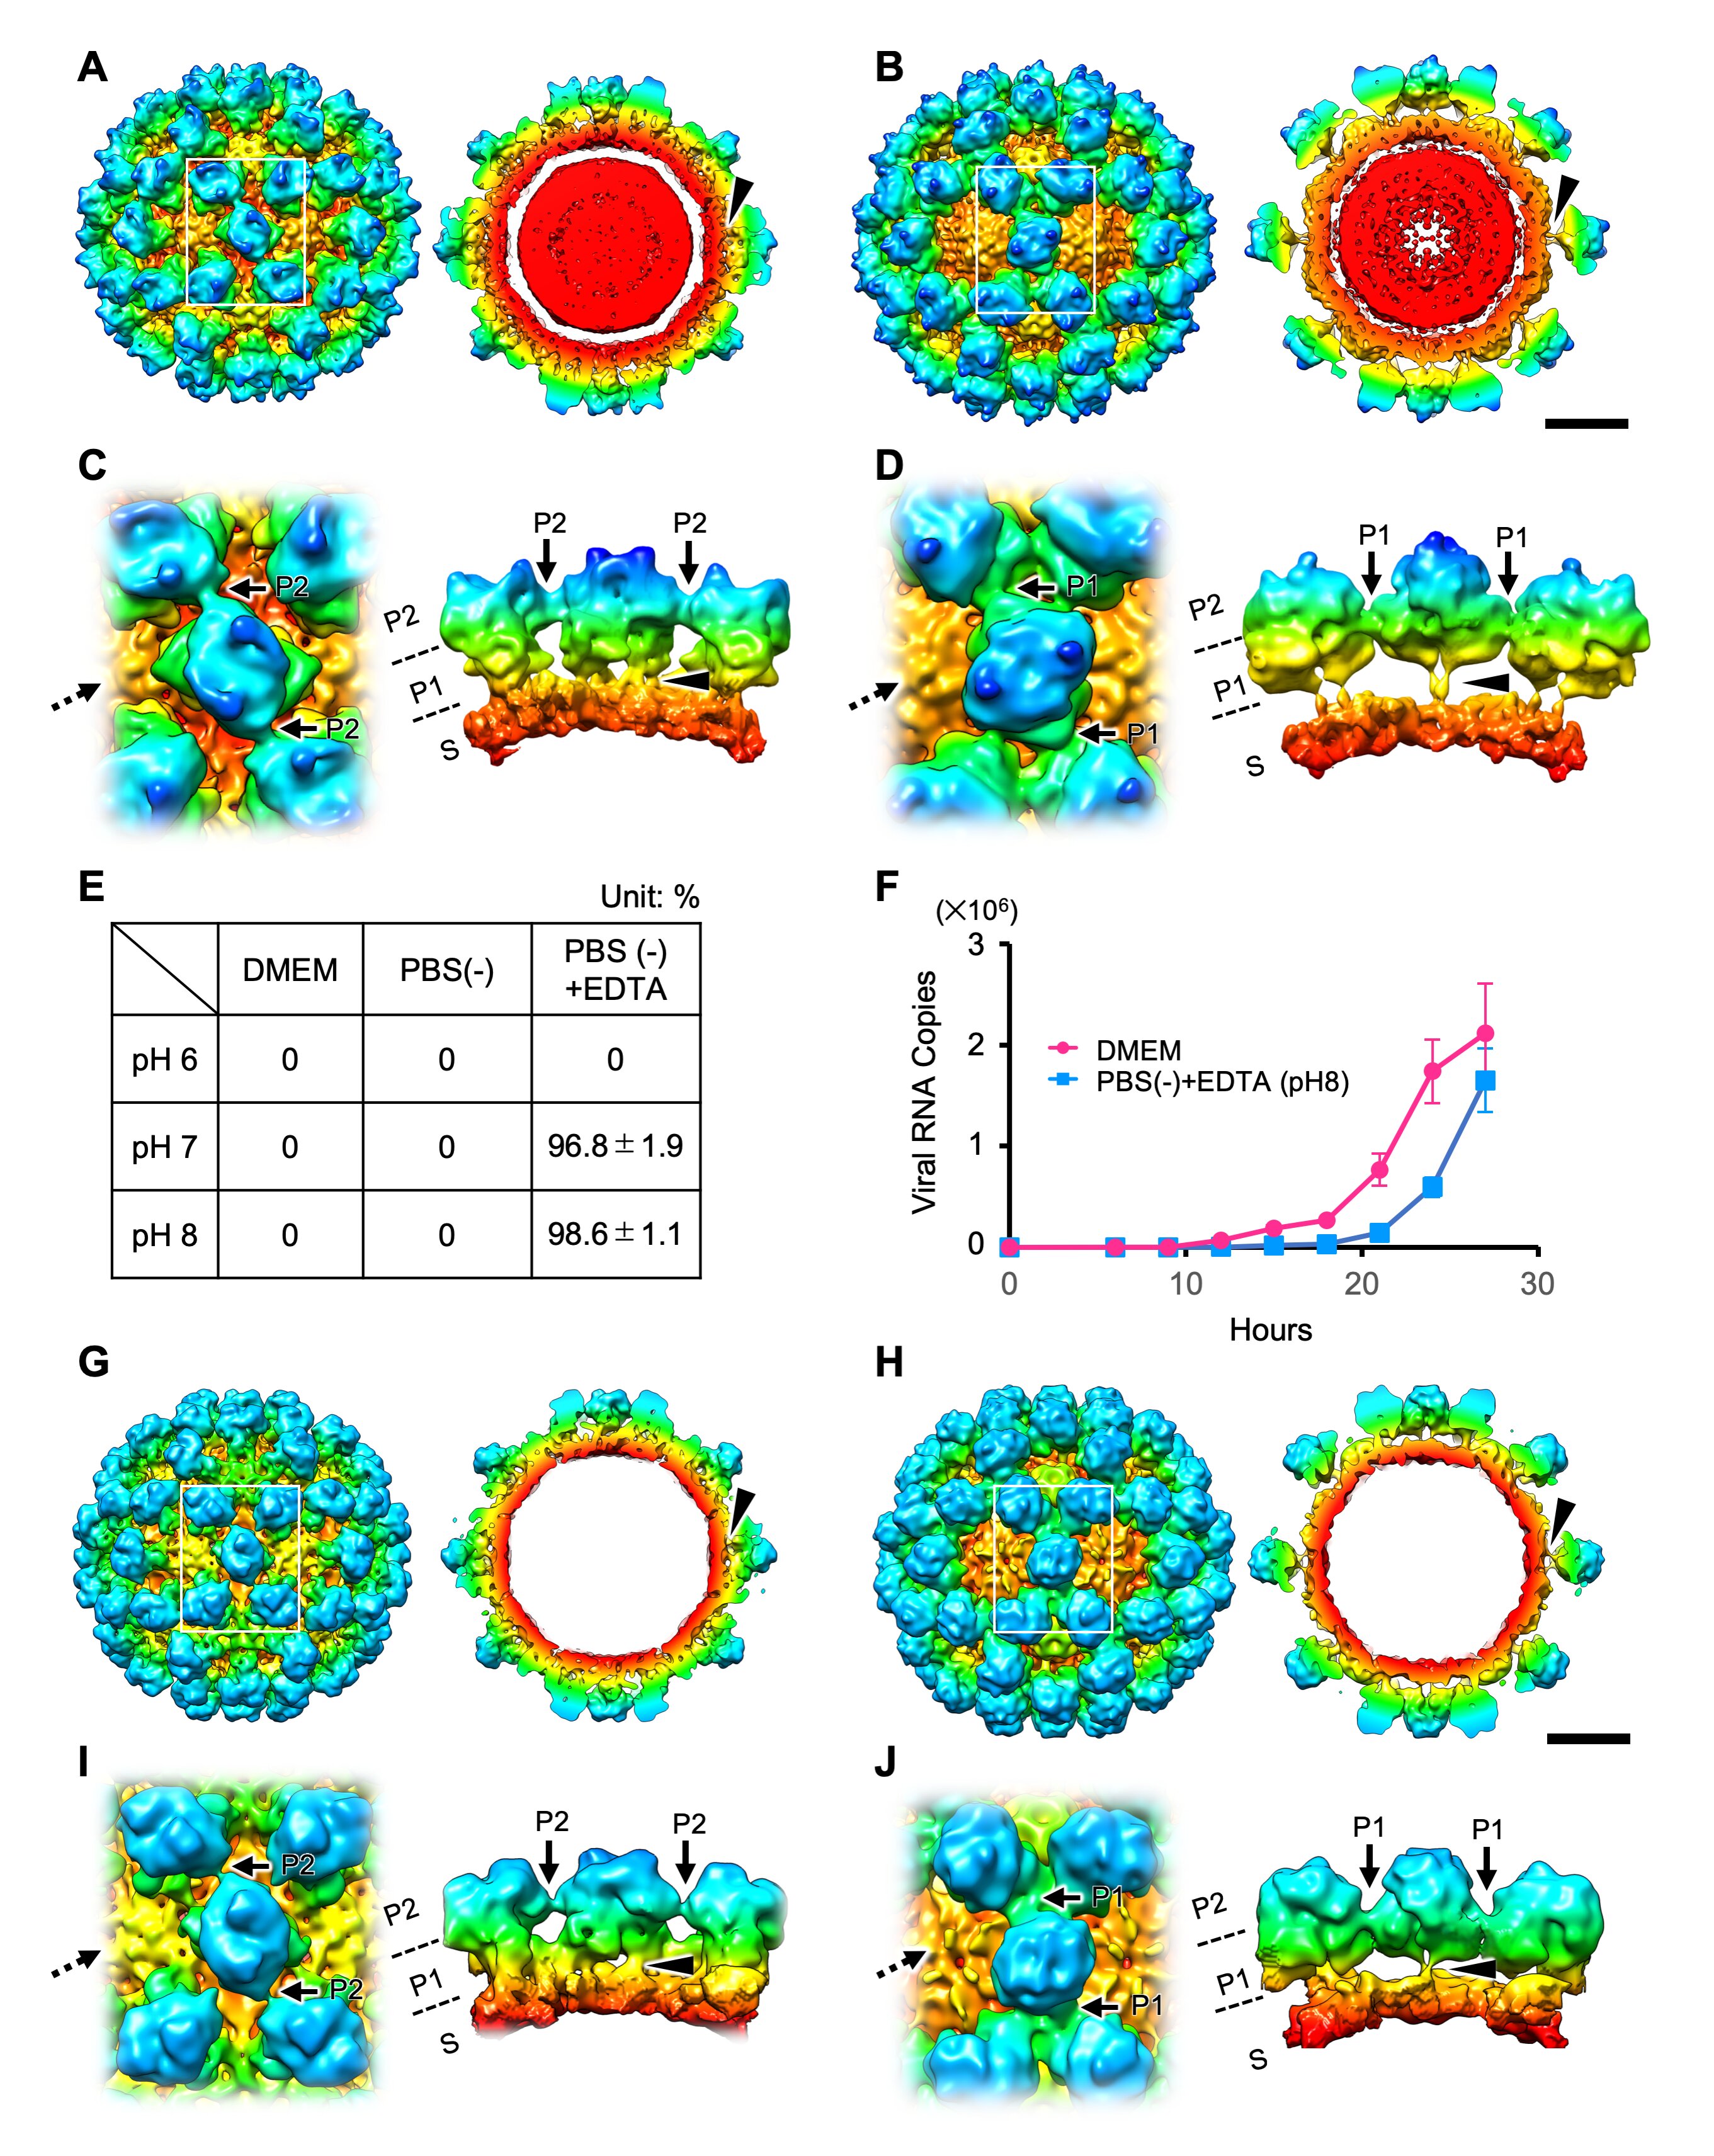 Norovirus has two alternative capsid structures which change before